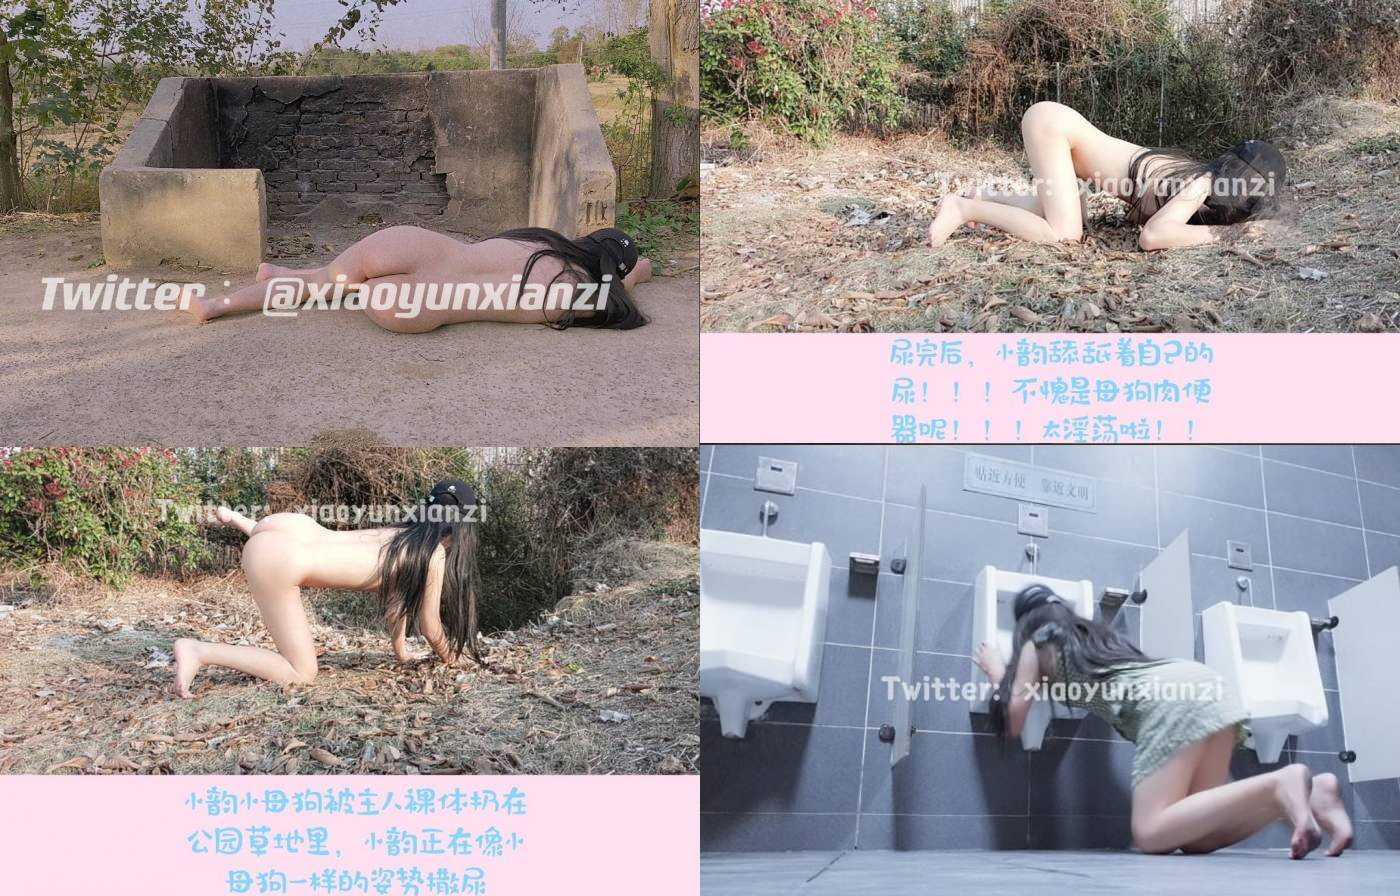 November the latest flow, can be nude can be adjusted can be fixed Twitter yellow super cute slim girl schoolgirl [small rhyme fairy] private shoot, the road to the men's toilet park all kinds of exposure, the men's toilet urinal licked clean!